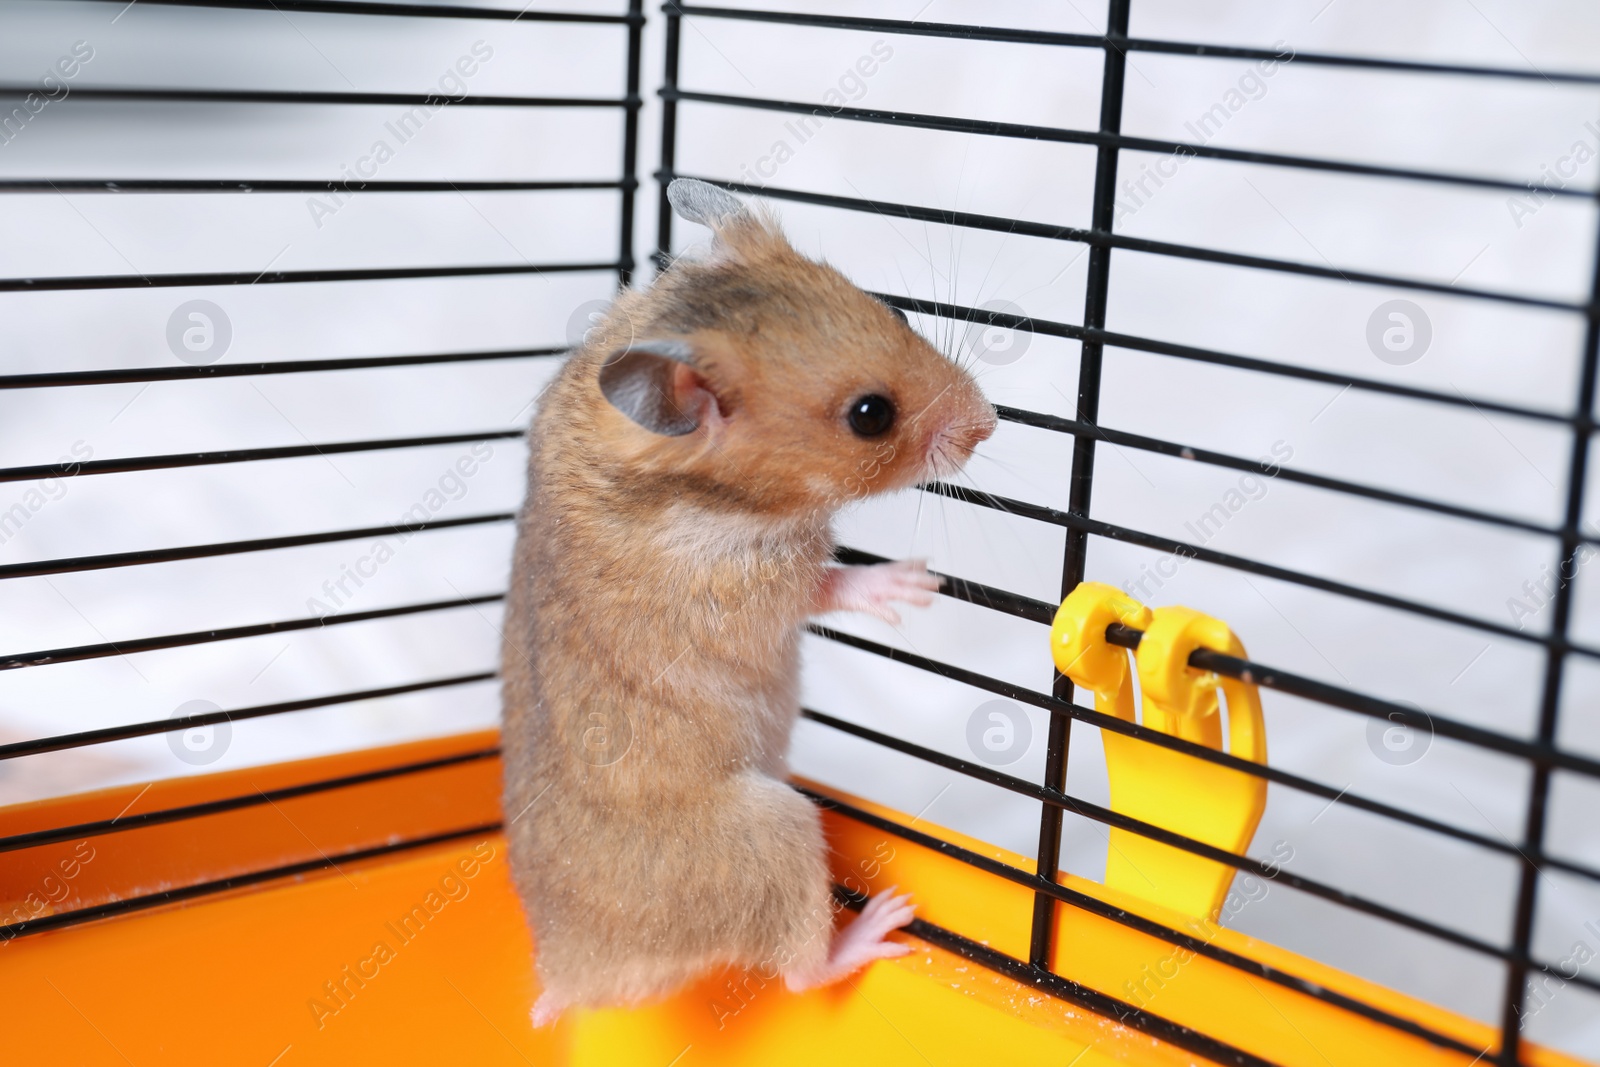 Photo of Cute little fluffy hamster climbing in cage